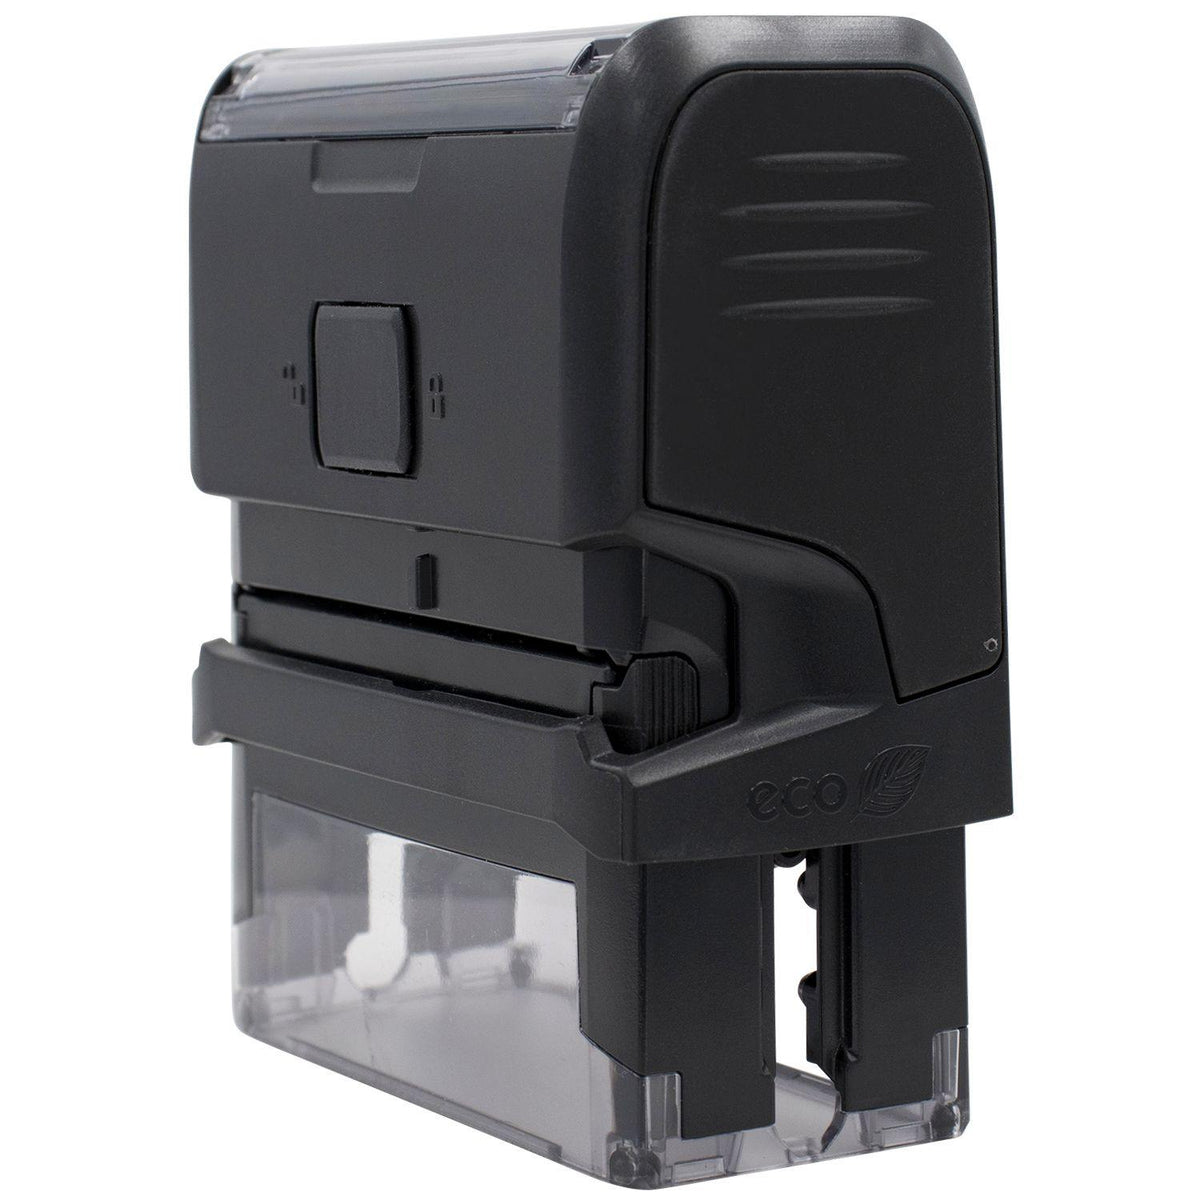 Self-Inking Secret Stamp - Engineer Seal Stamps - Brand_Trodat, Impression Size_Small, Stamp Type_Self-Inking Stamp, Type of Use_General, Type of Use_Legal, Type of Use_Medical Office, Type of Use_Office